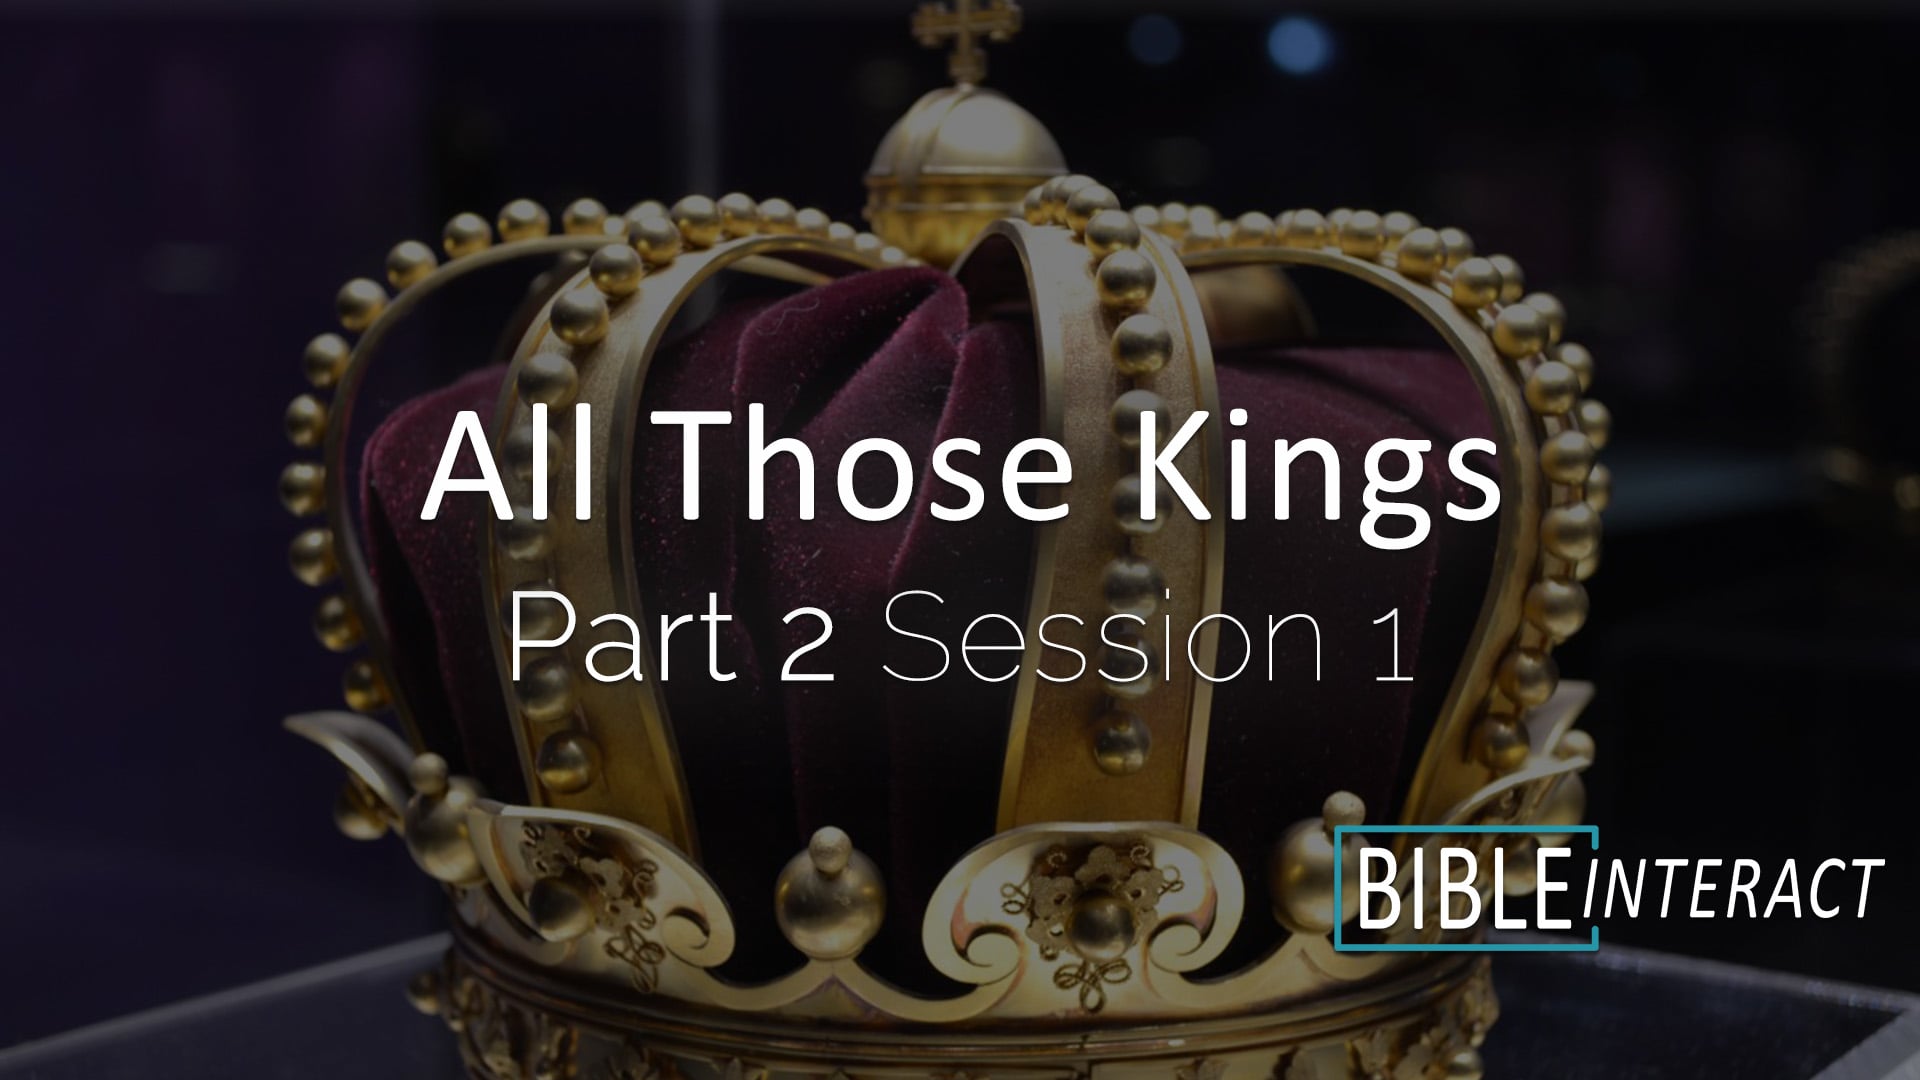 All Those Kings Part 2 Session 1